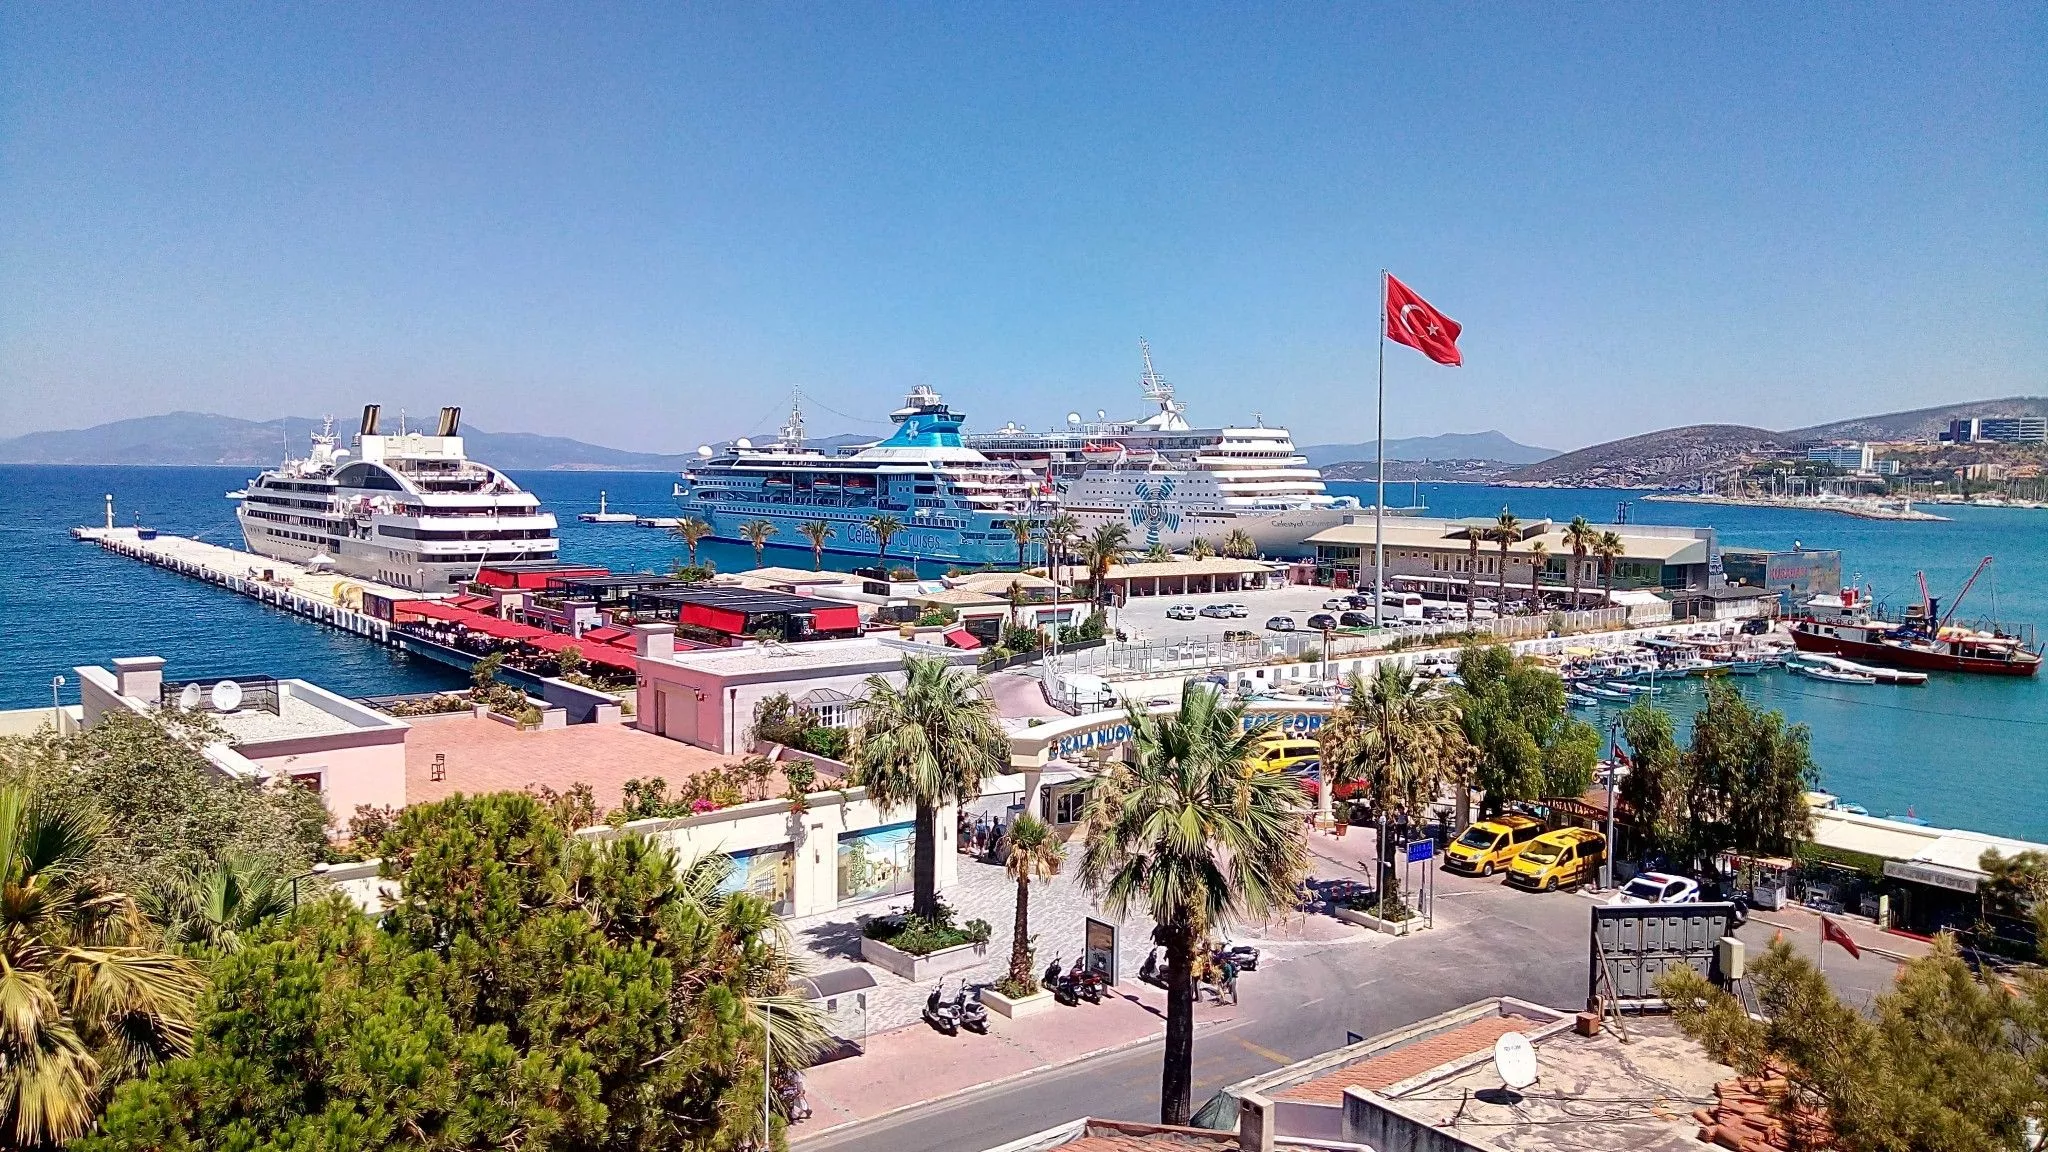 Kusadasi Harbor in Turkey, Central Asia | Yachting - Rated 3.6